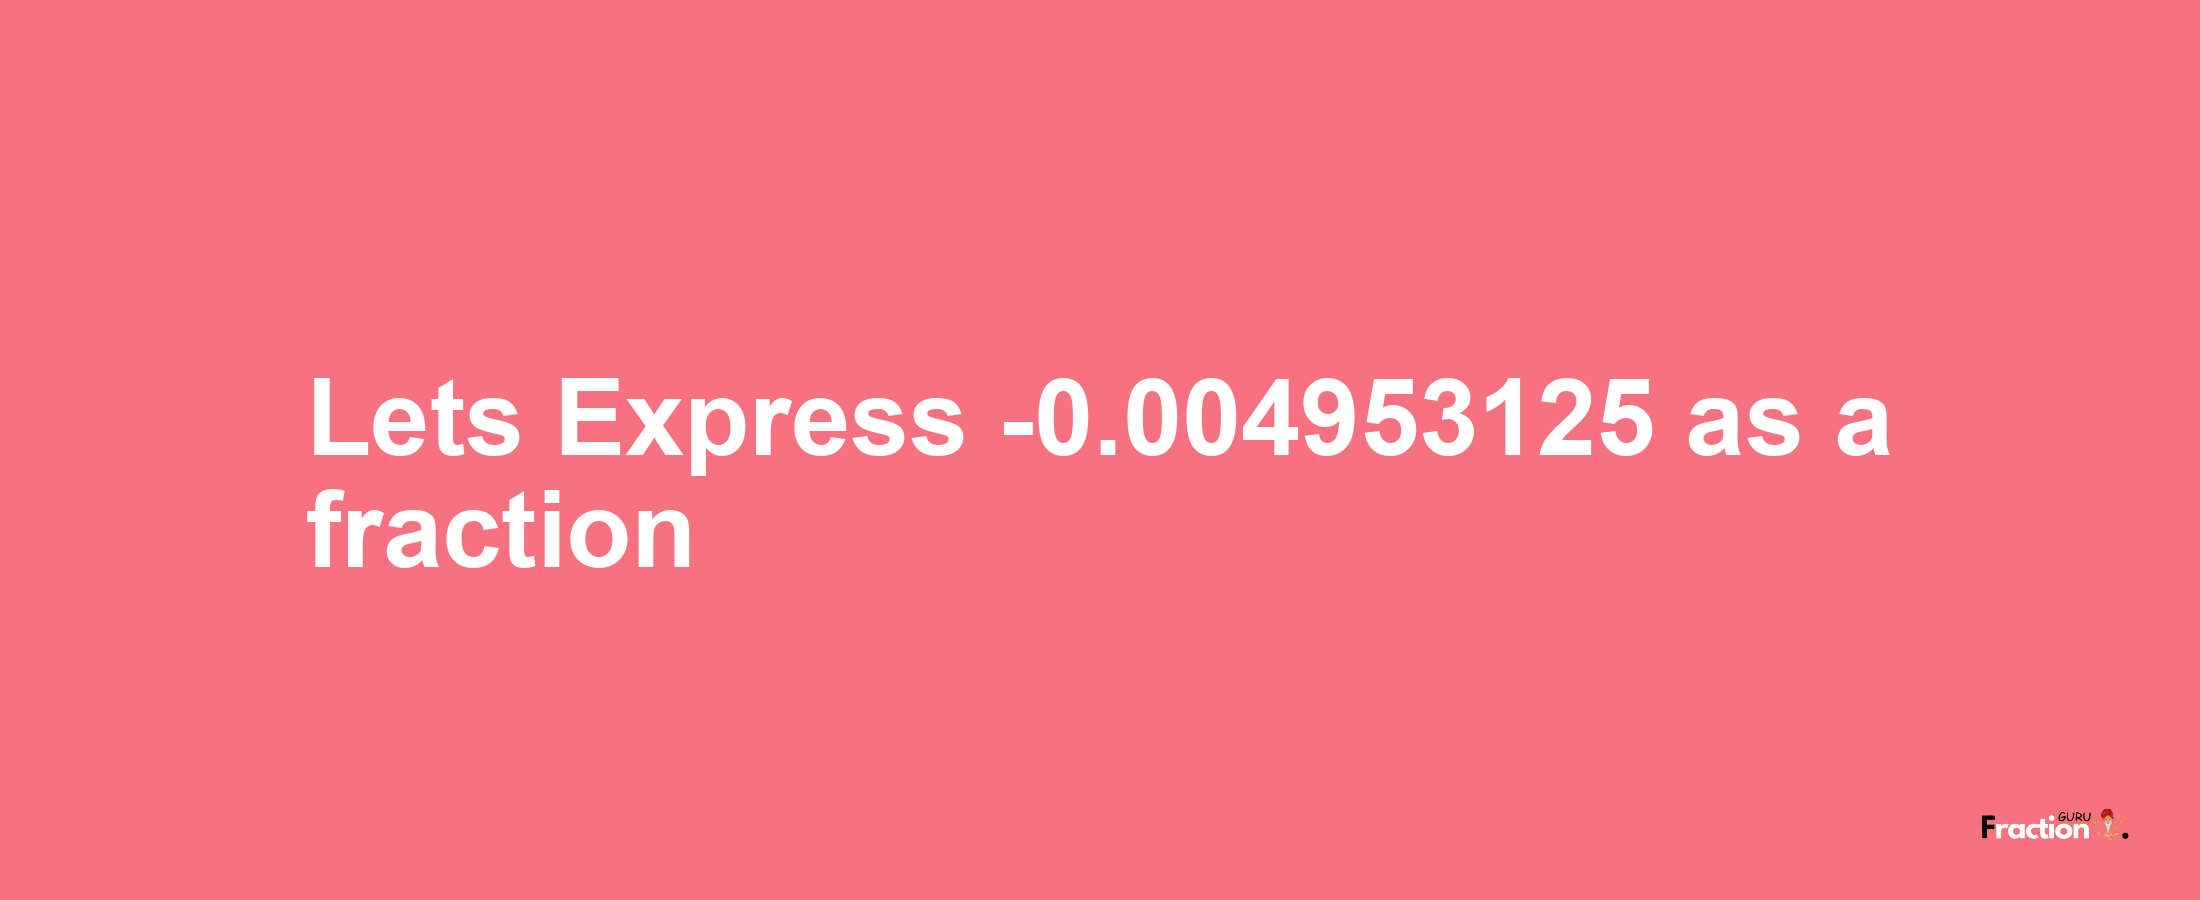 Lets Express -0.004953125 as afraction